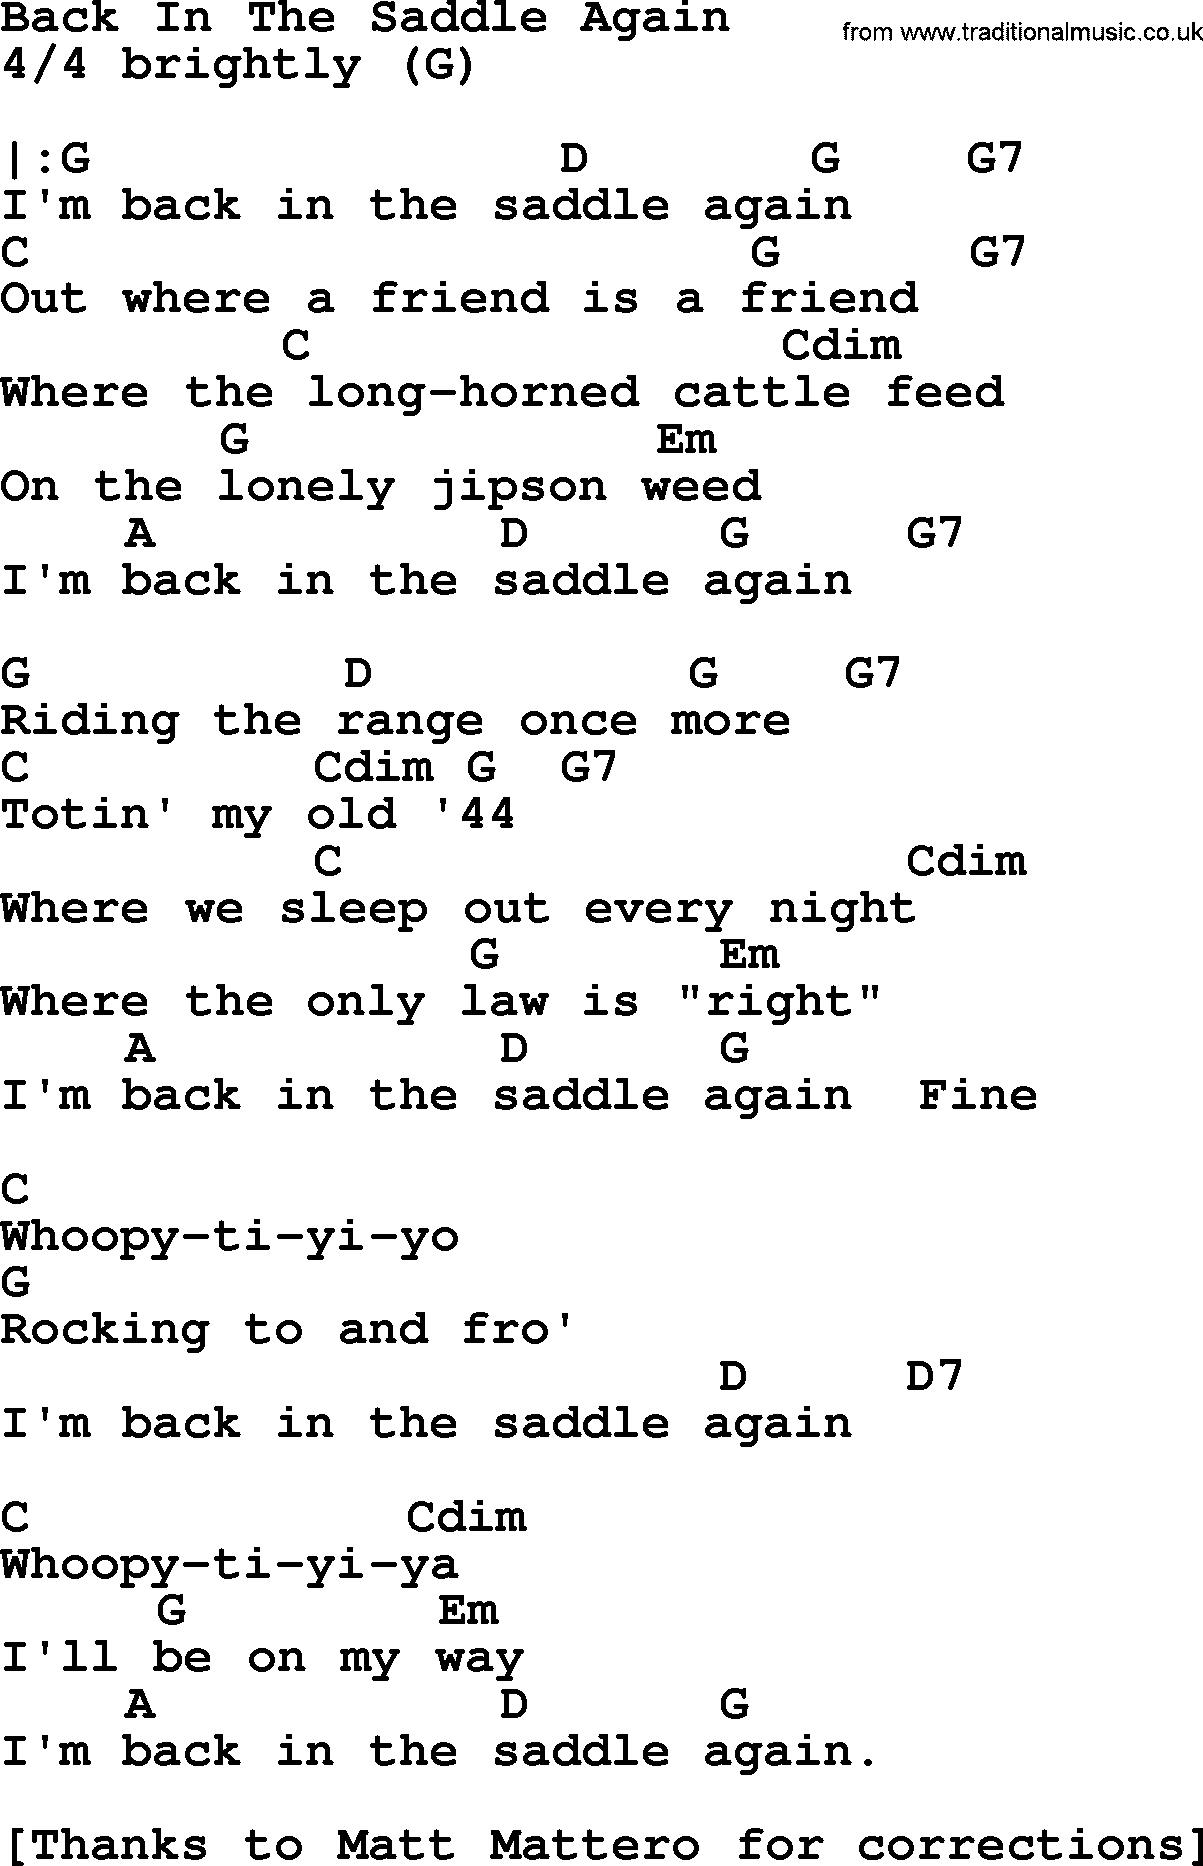 Bluegrass song: Back In The Saddle Again, lyrics and chords